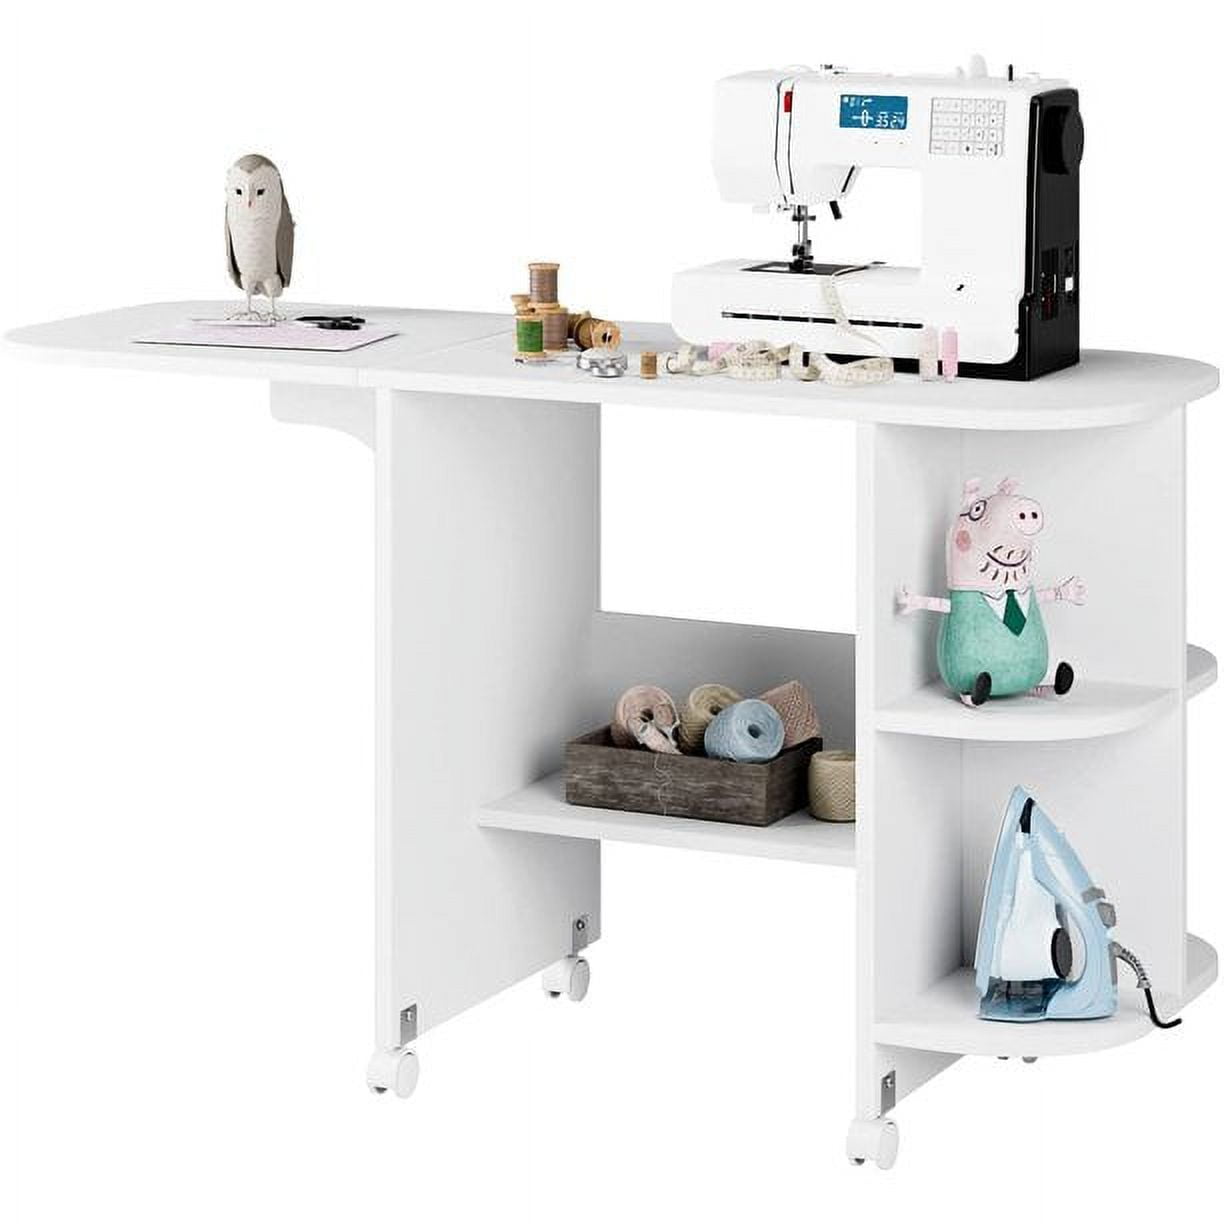 Homfa Folding Sewing Machine Table with Cabinet, 63 Inch Multipurpose Large  Sewing Craft Cart with Storage Shelves, Sewing Desk with Lockable Casters